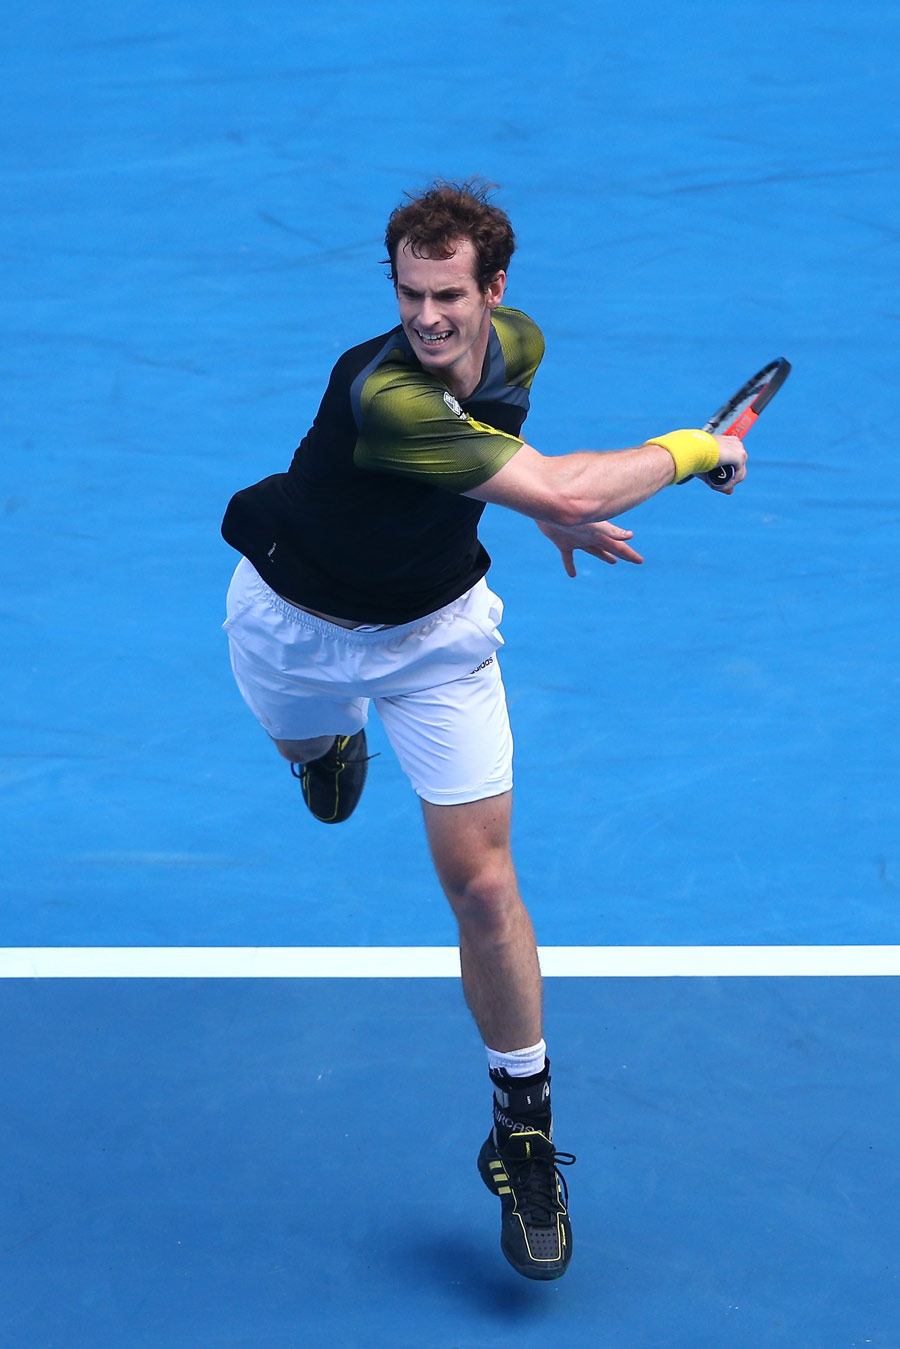 Andy Murray powers into a forehand